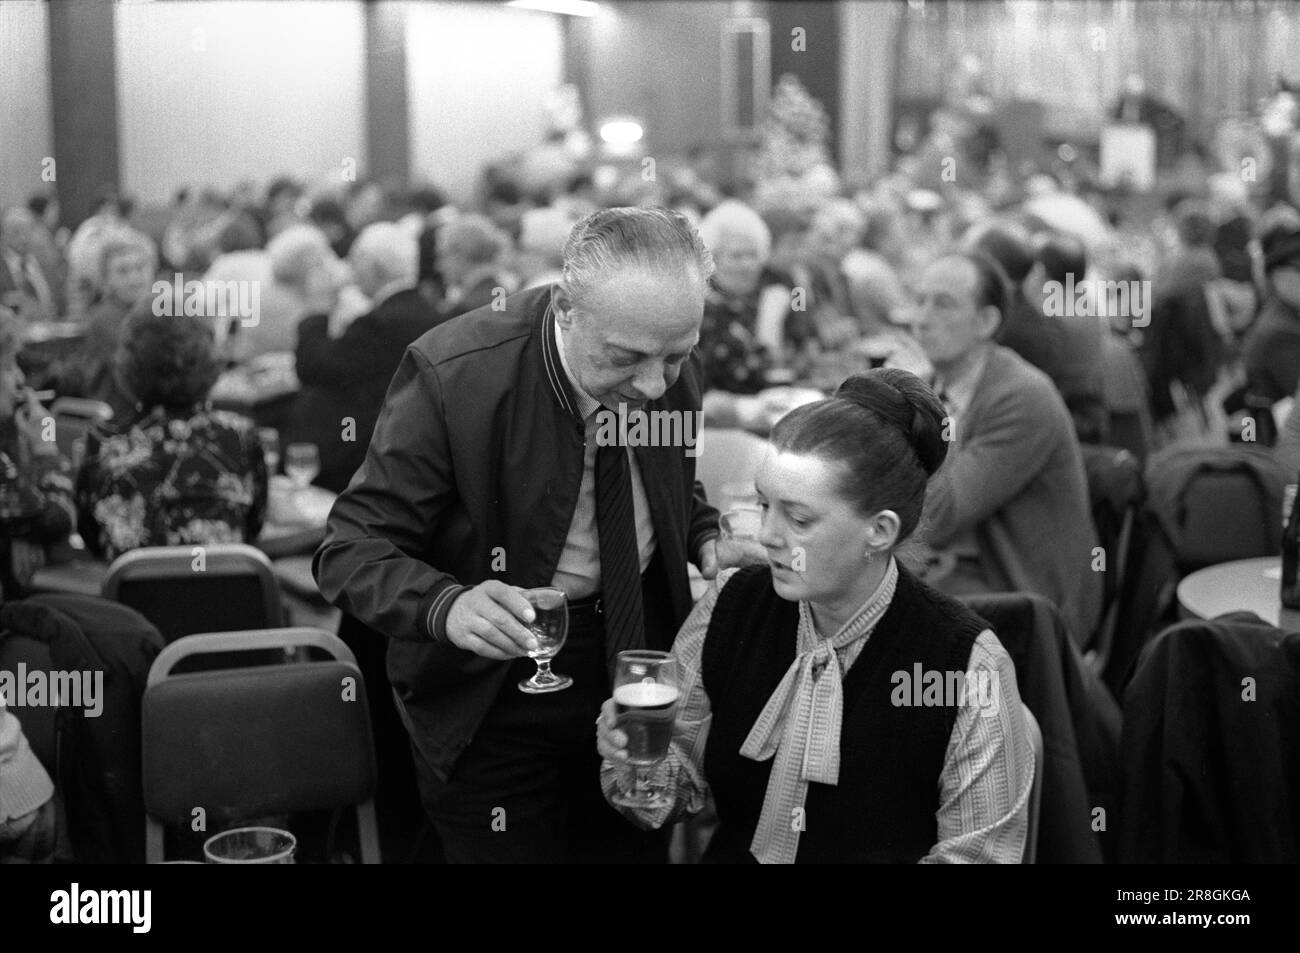 Couple 1980s Saturday night out together. Coventry Working Mens Club, Saturday night  bingo evening entertainment. Do you fancy another one 'duck'? A common expression, a term of endearment in the Midlands and the North of England. Coventry, England circa 1981 80s UK HOMER SYKES Stock Photo